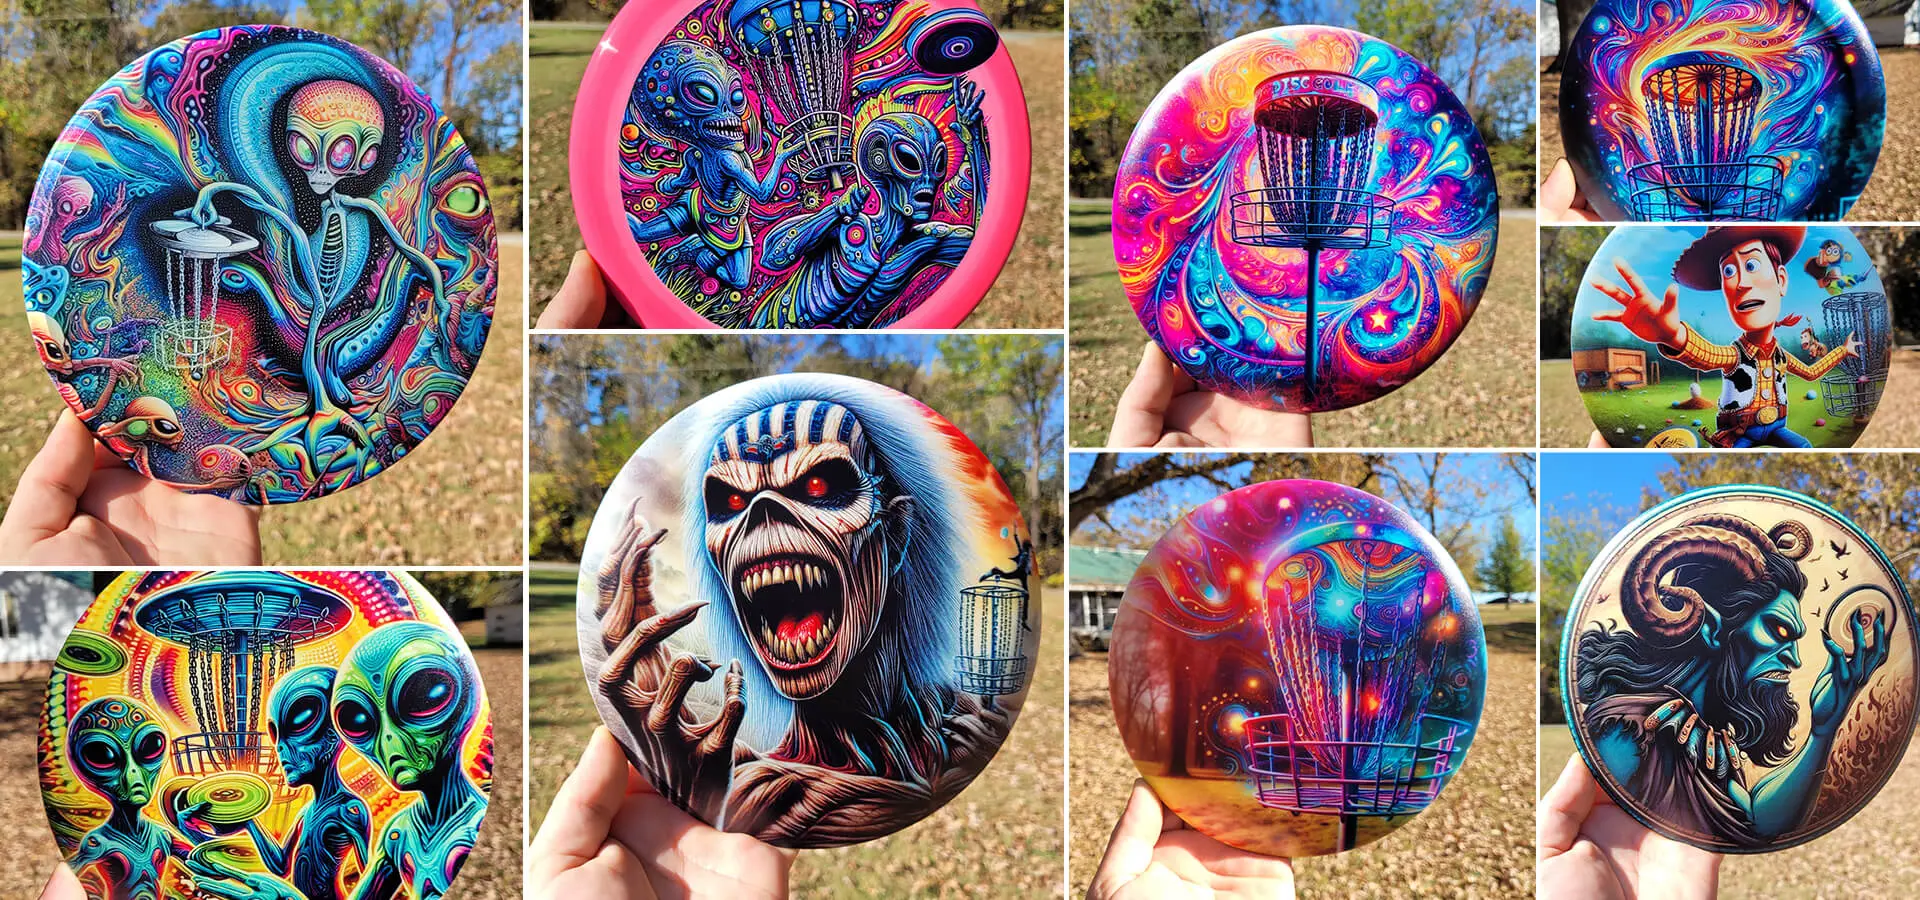 A series of pictures showing different designs on frisbees.